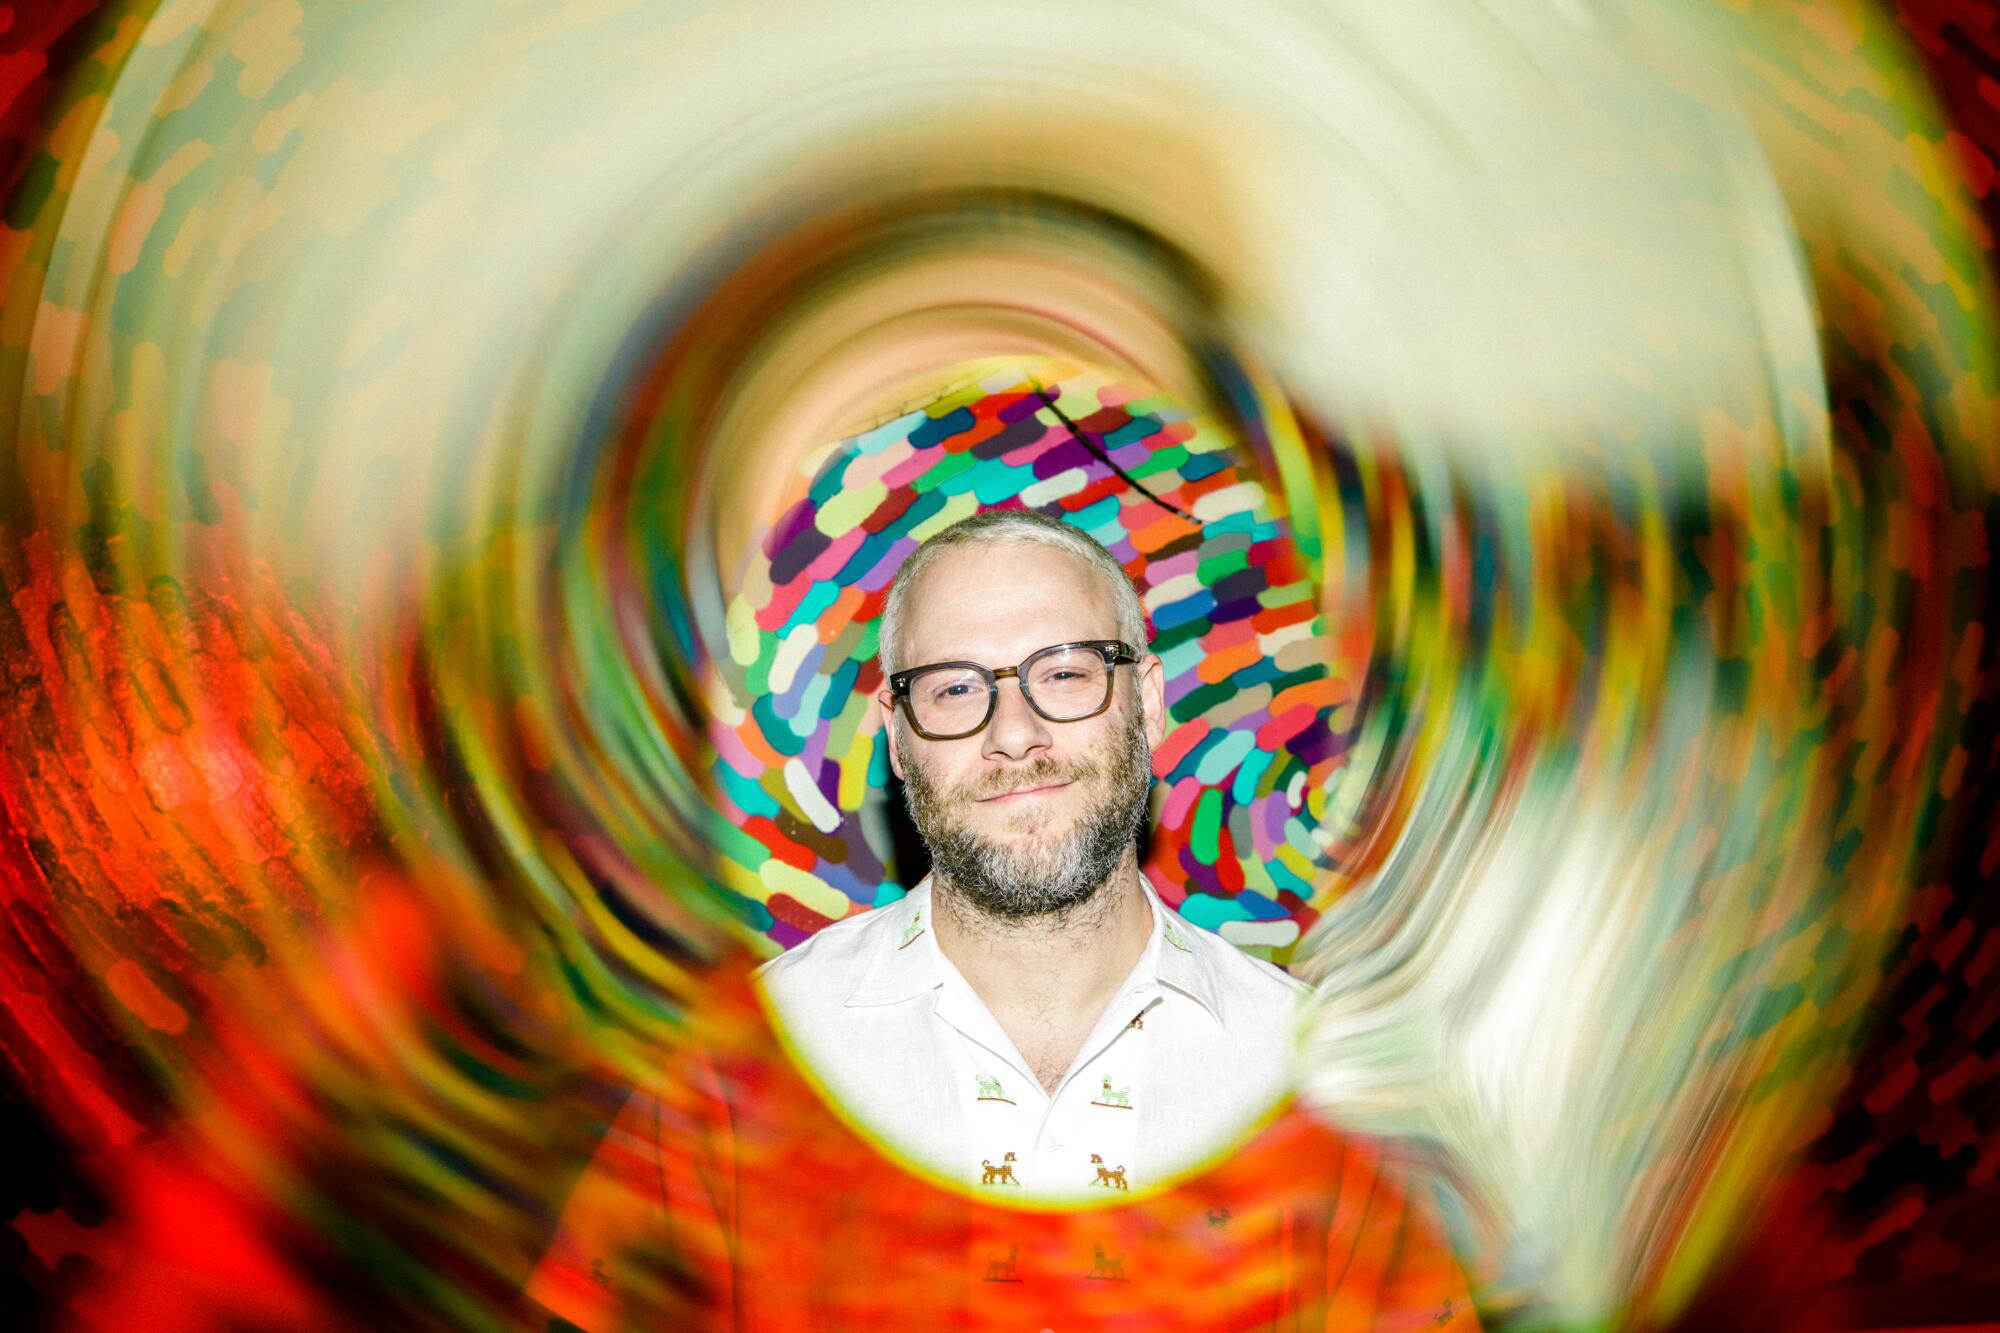 A multicolored, psychedelic portrait of actor-writer-producer Seth Rogen